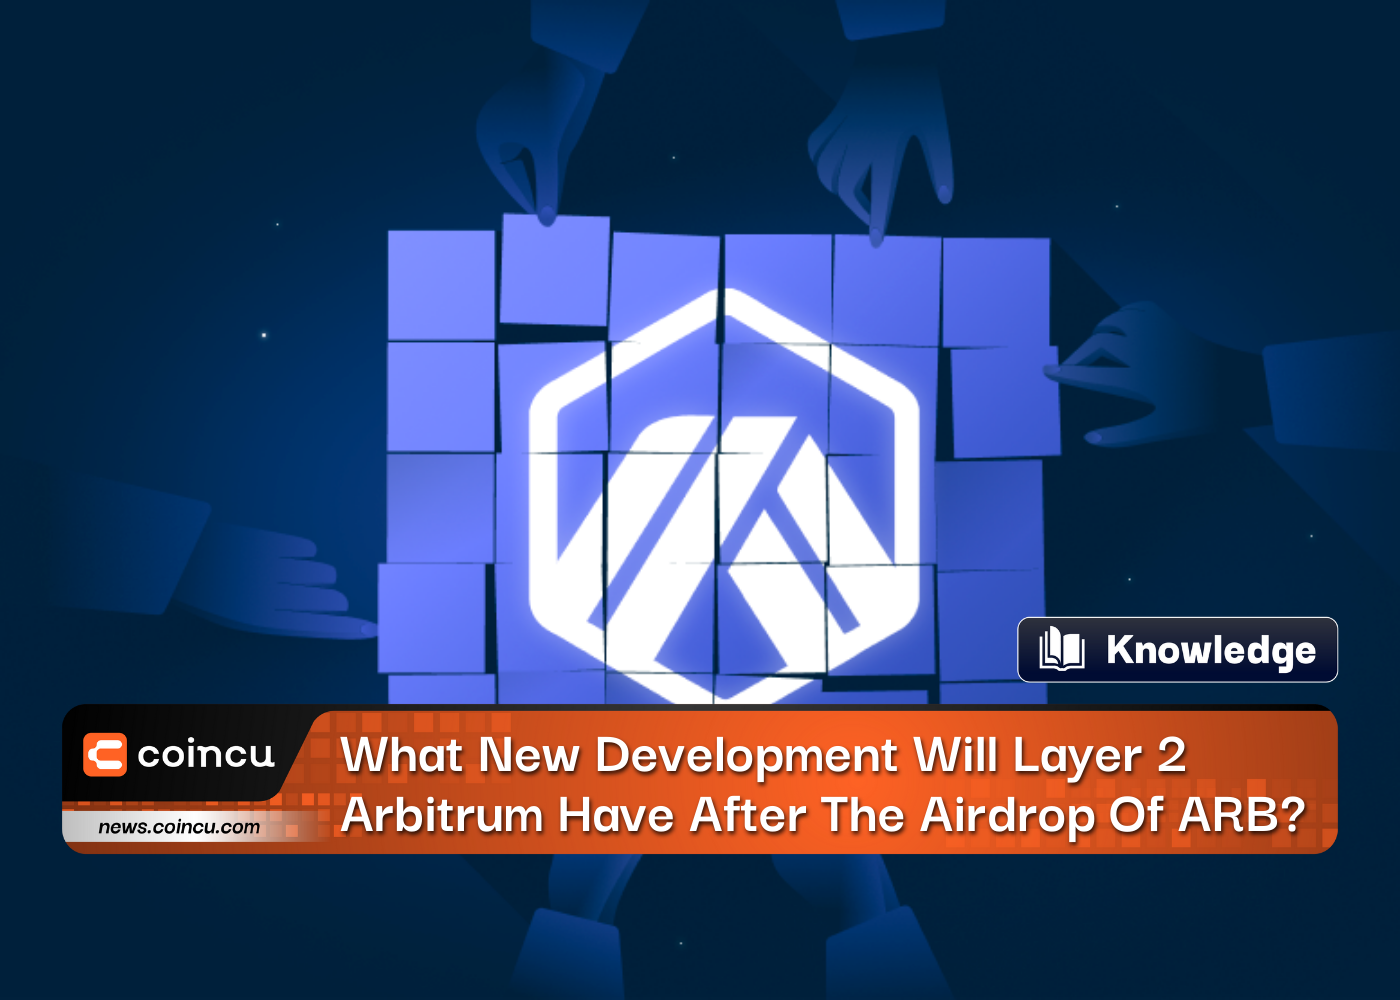 What New Development Will Layer 2 Arbitrum Have After The Airdrop Of ARB?